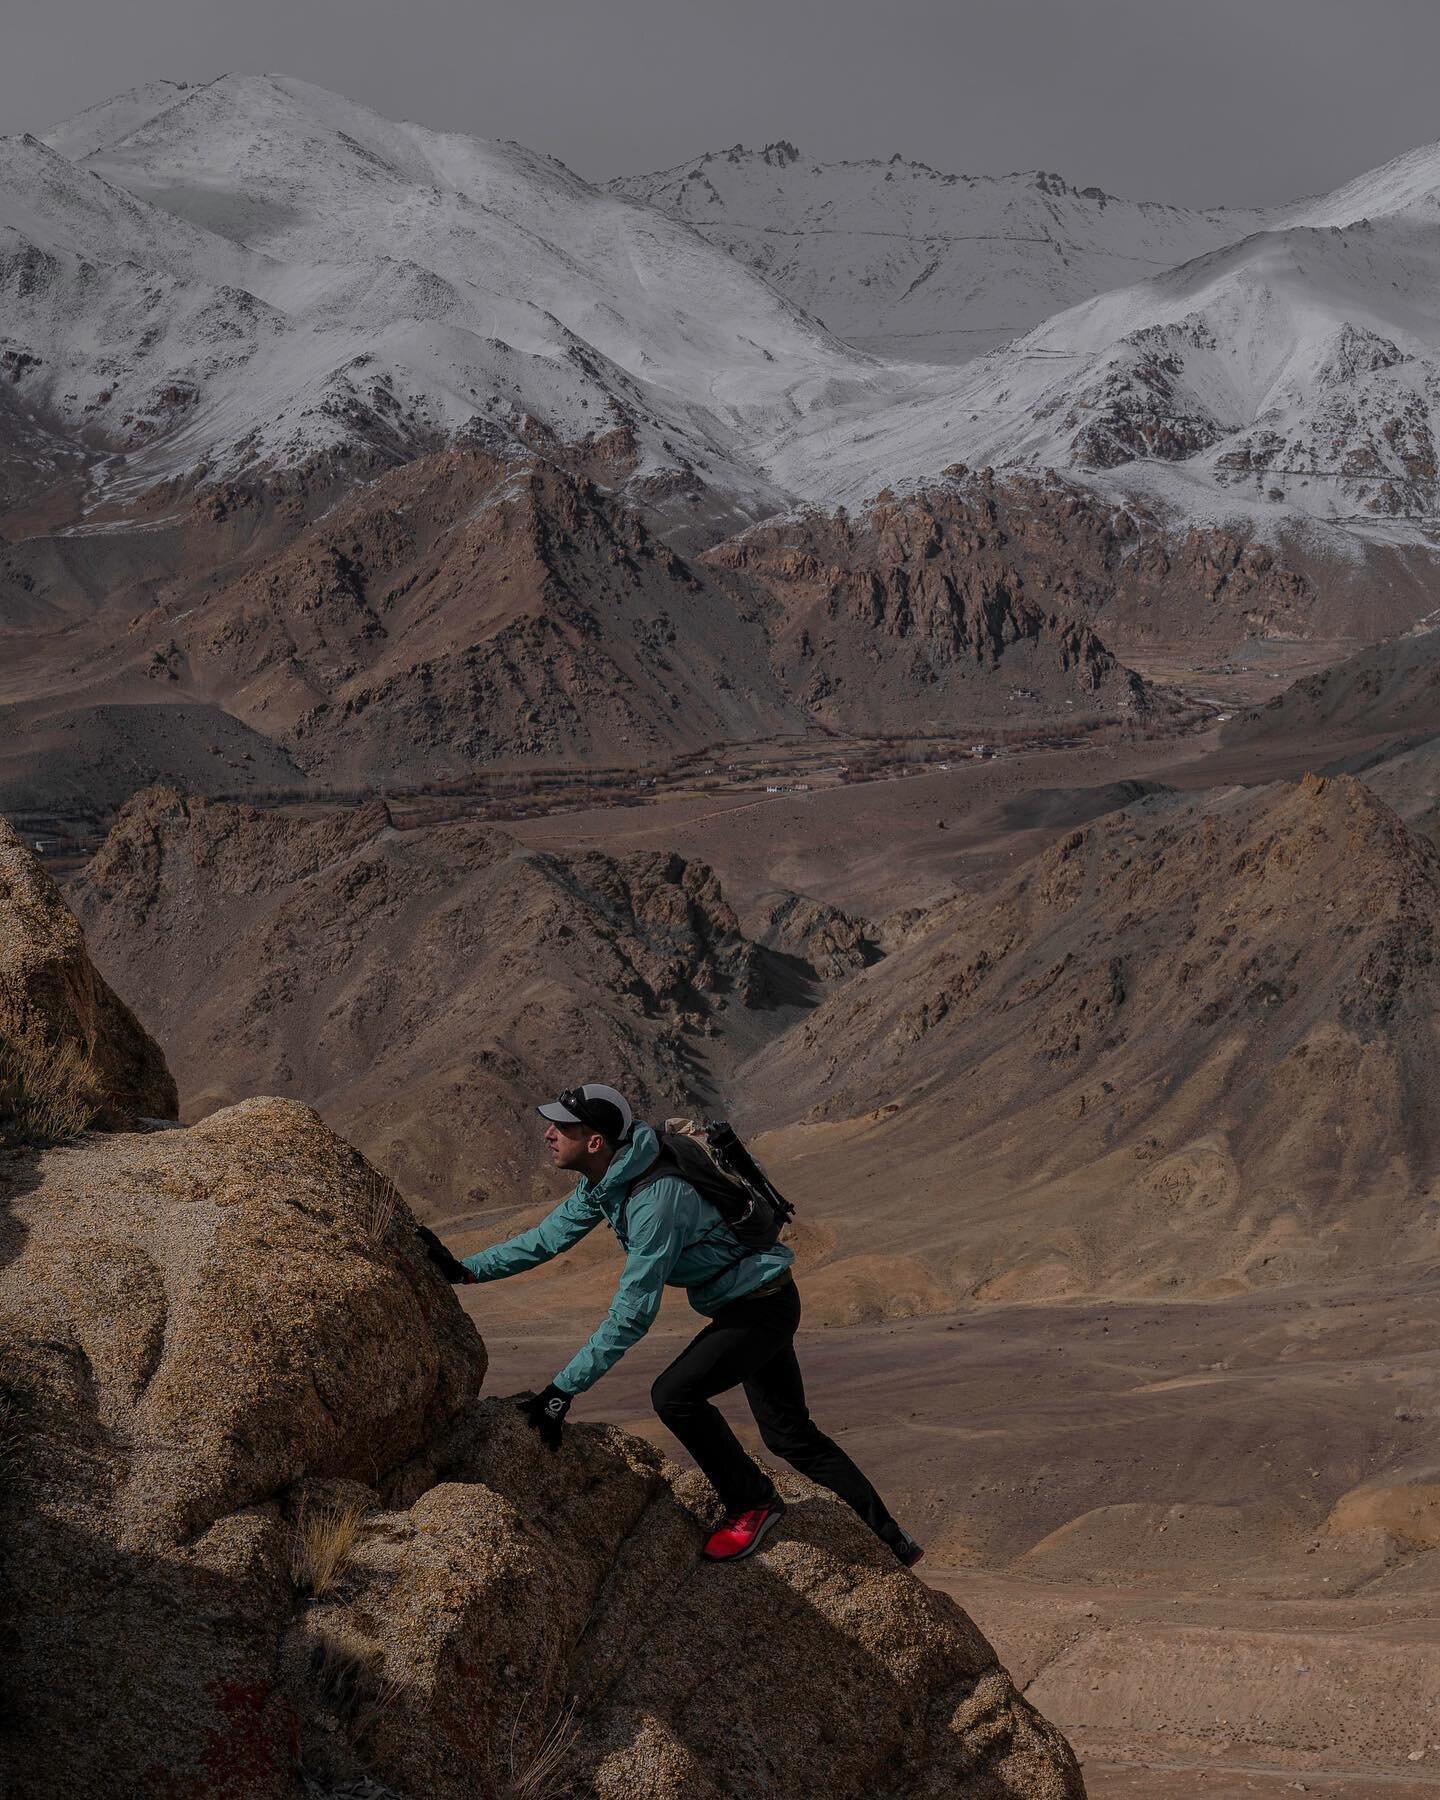 During my first few days in Ladakh I didn't feel so well and found it hard to gain the motivation to get going on meaningful work or explore outside my cold room. 

That's when I remembered that sometimes the best medicine is to move, spin the body i